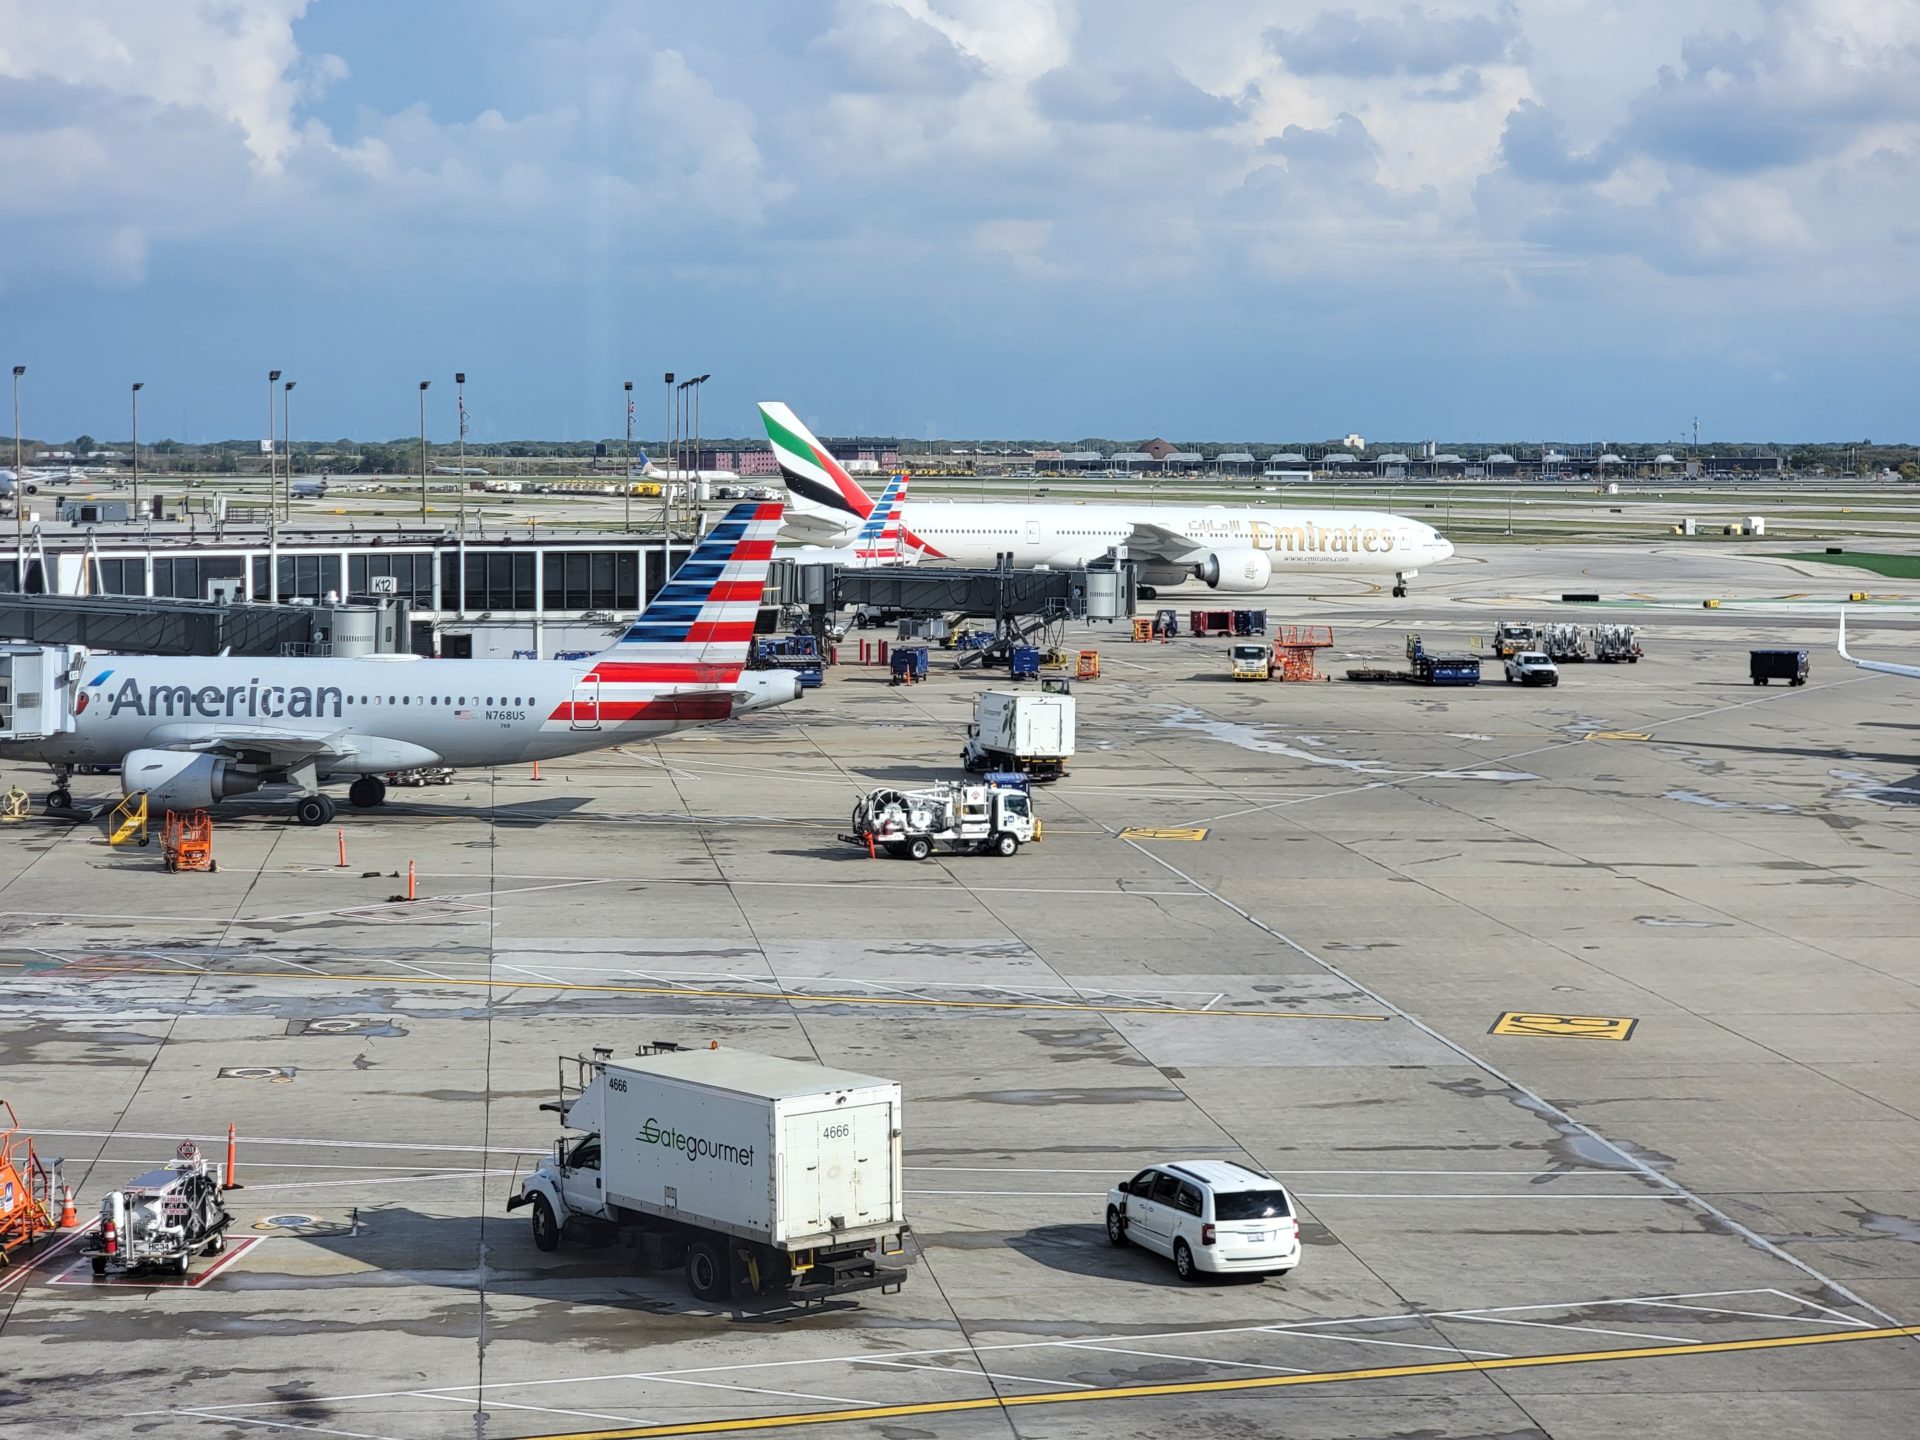 airplanes parked on a tarmac